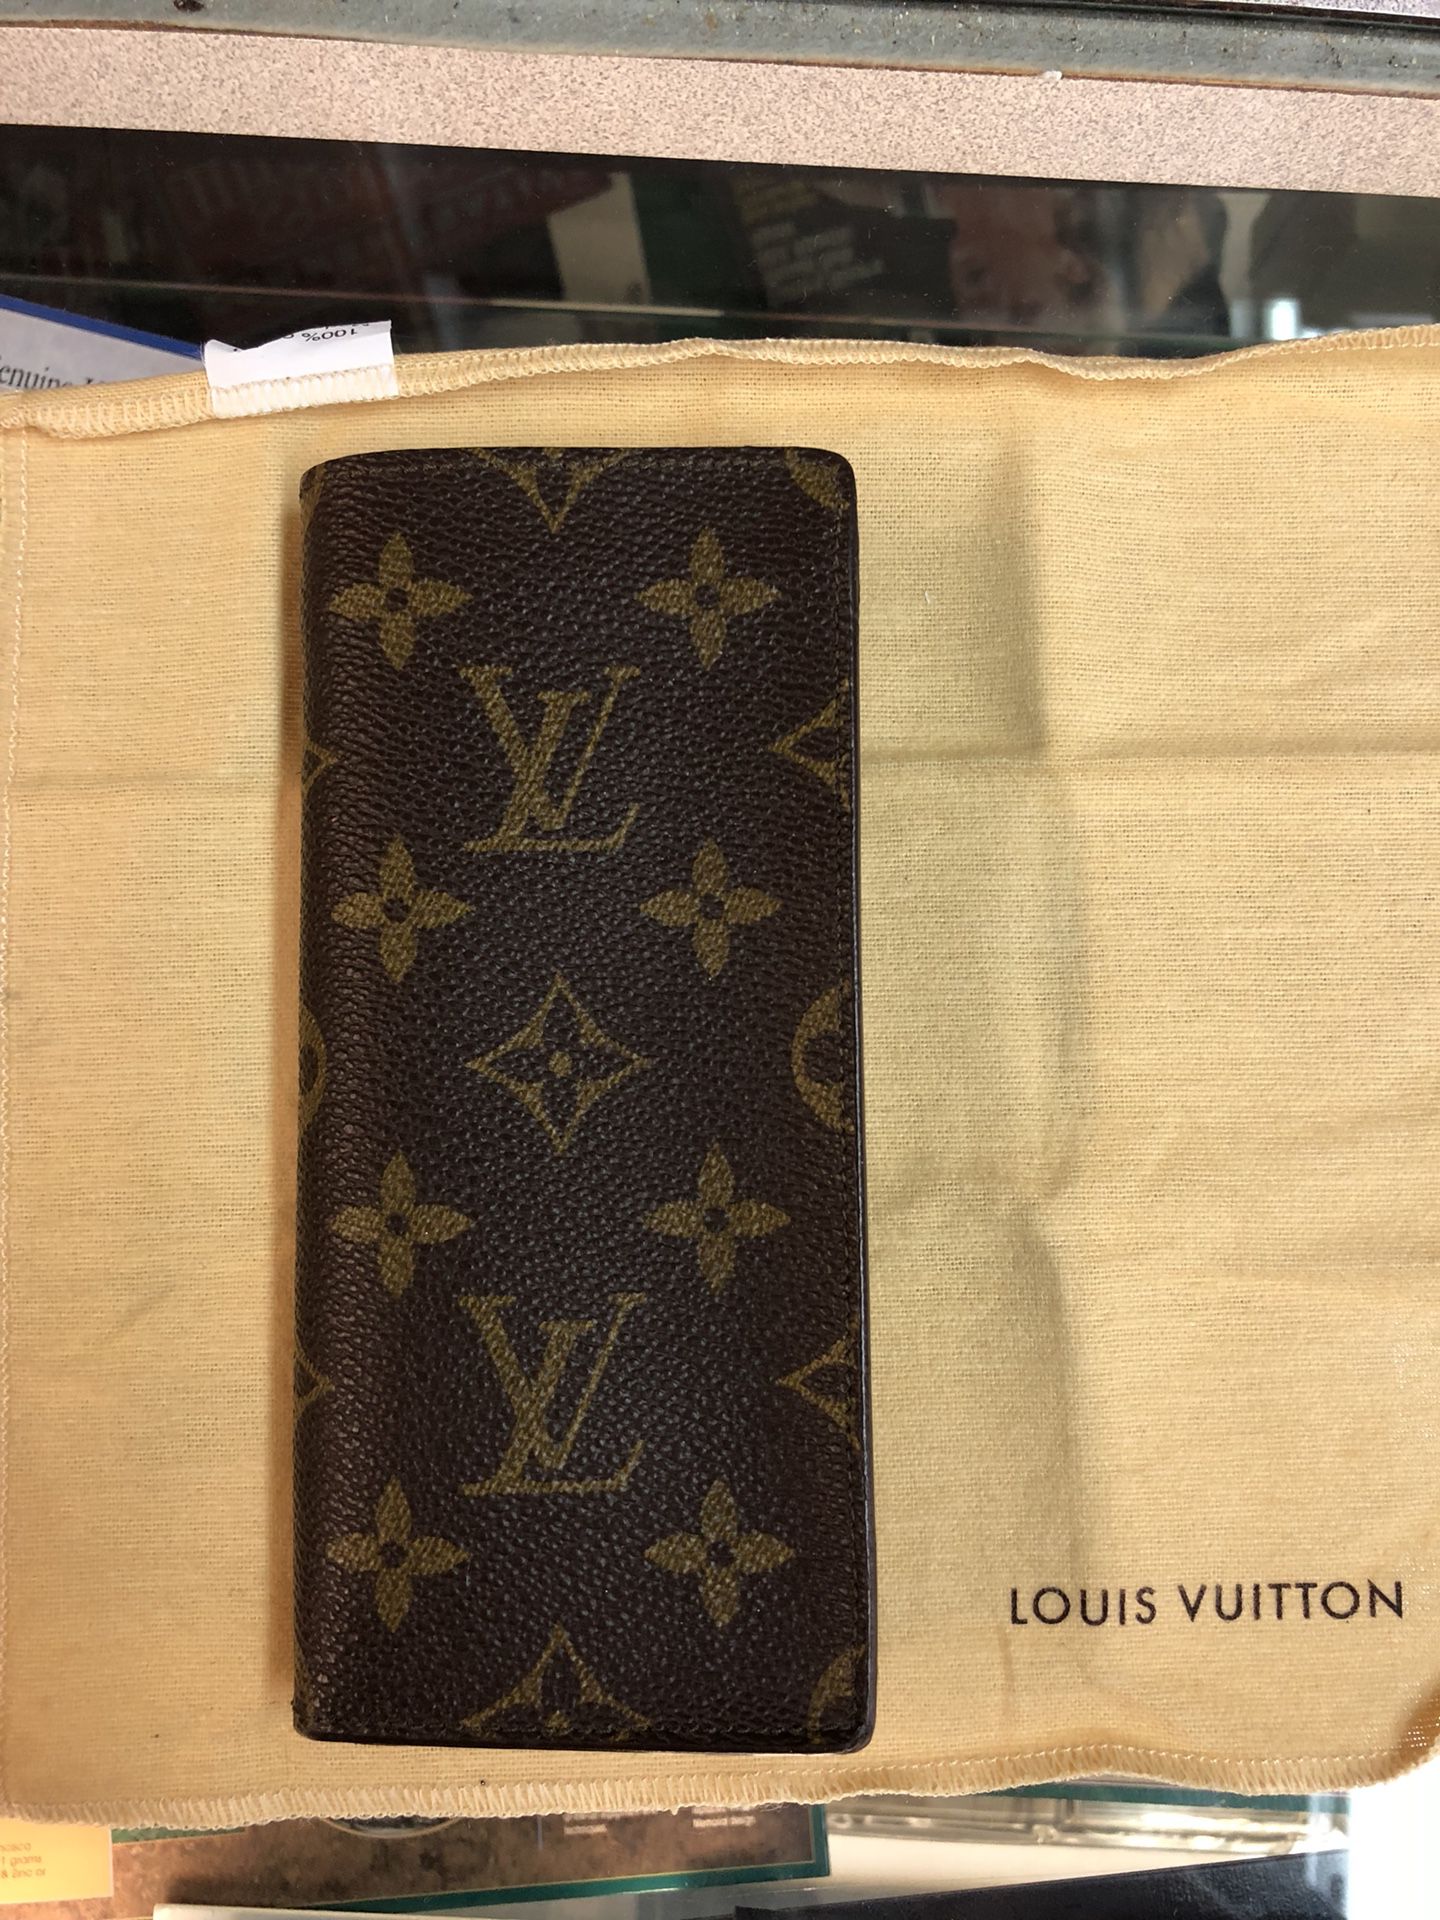 LOUIS VUITTON GLASSES CASE for Sale in Los Angeles, CA - OfferUp